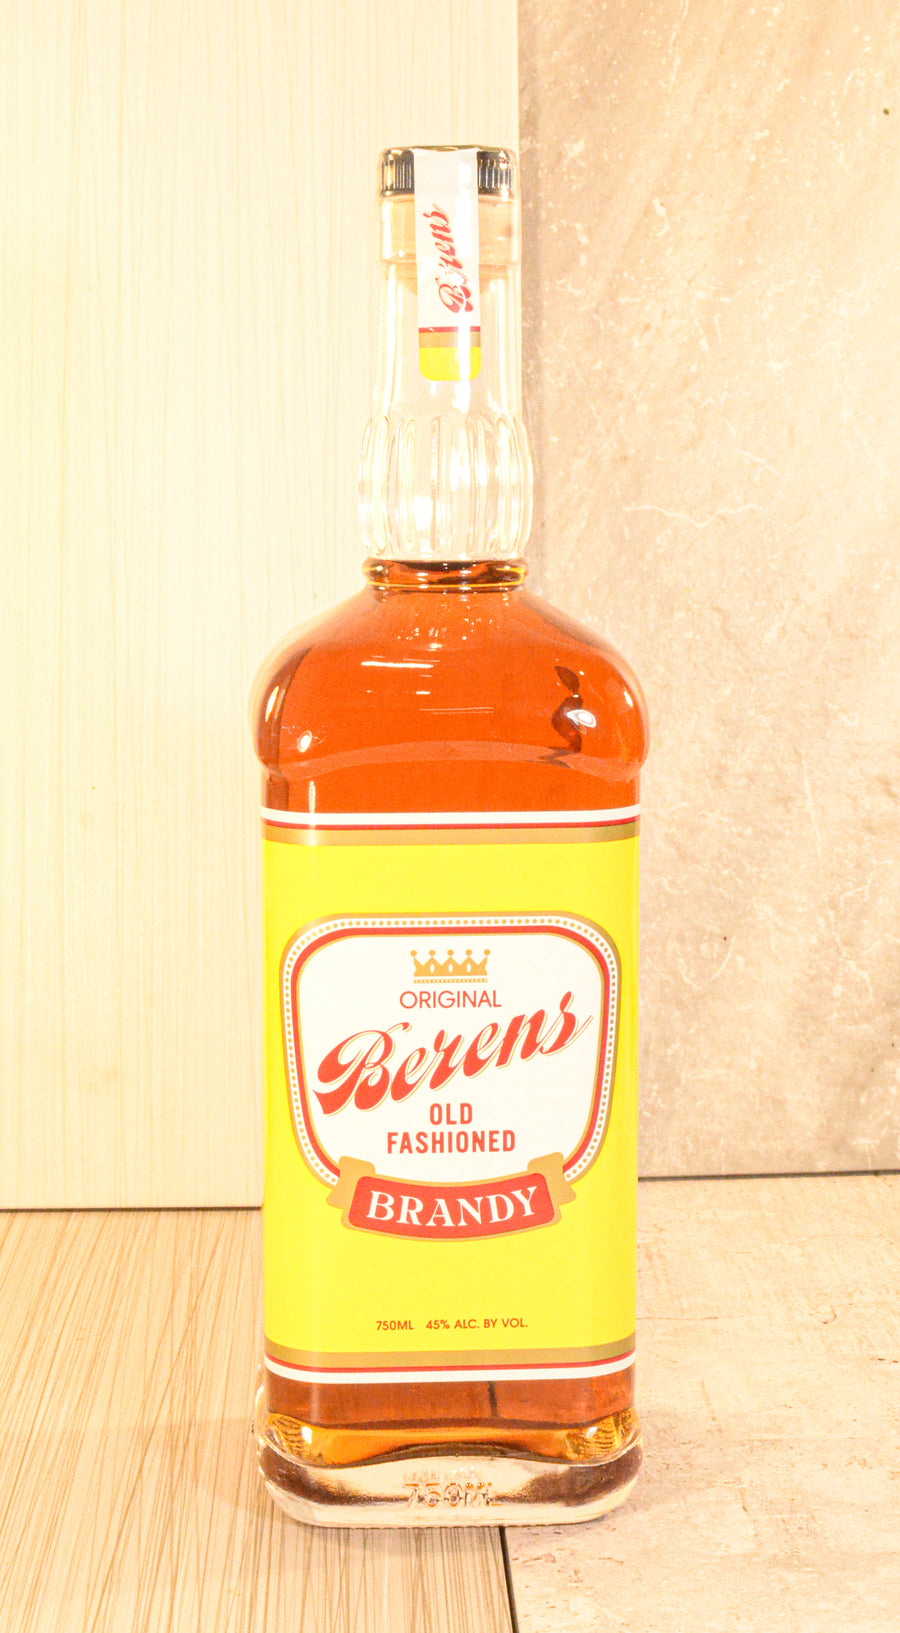 Berens Old Fashioned Brandy 750ml